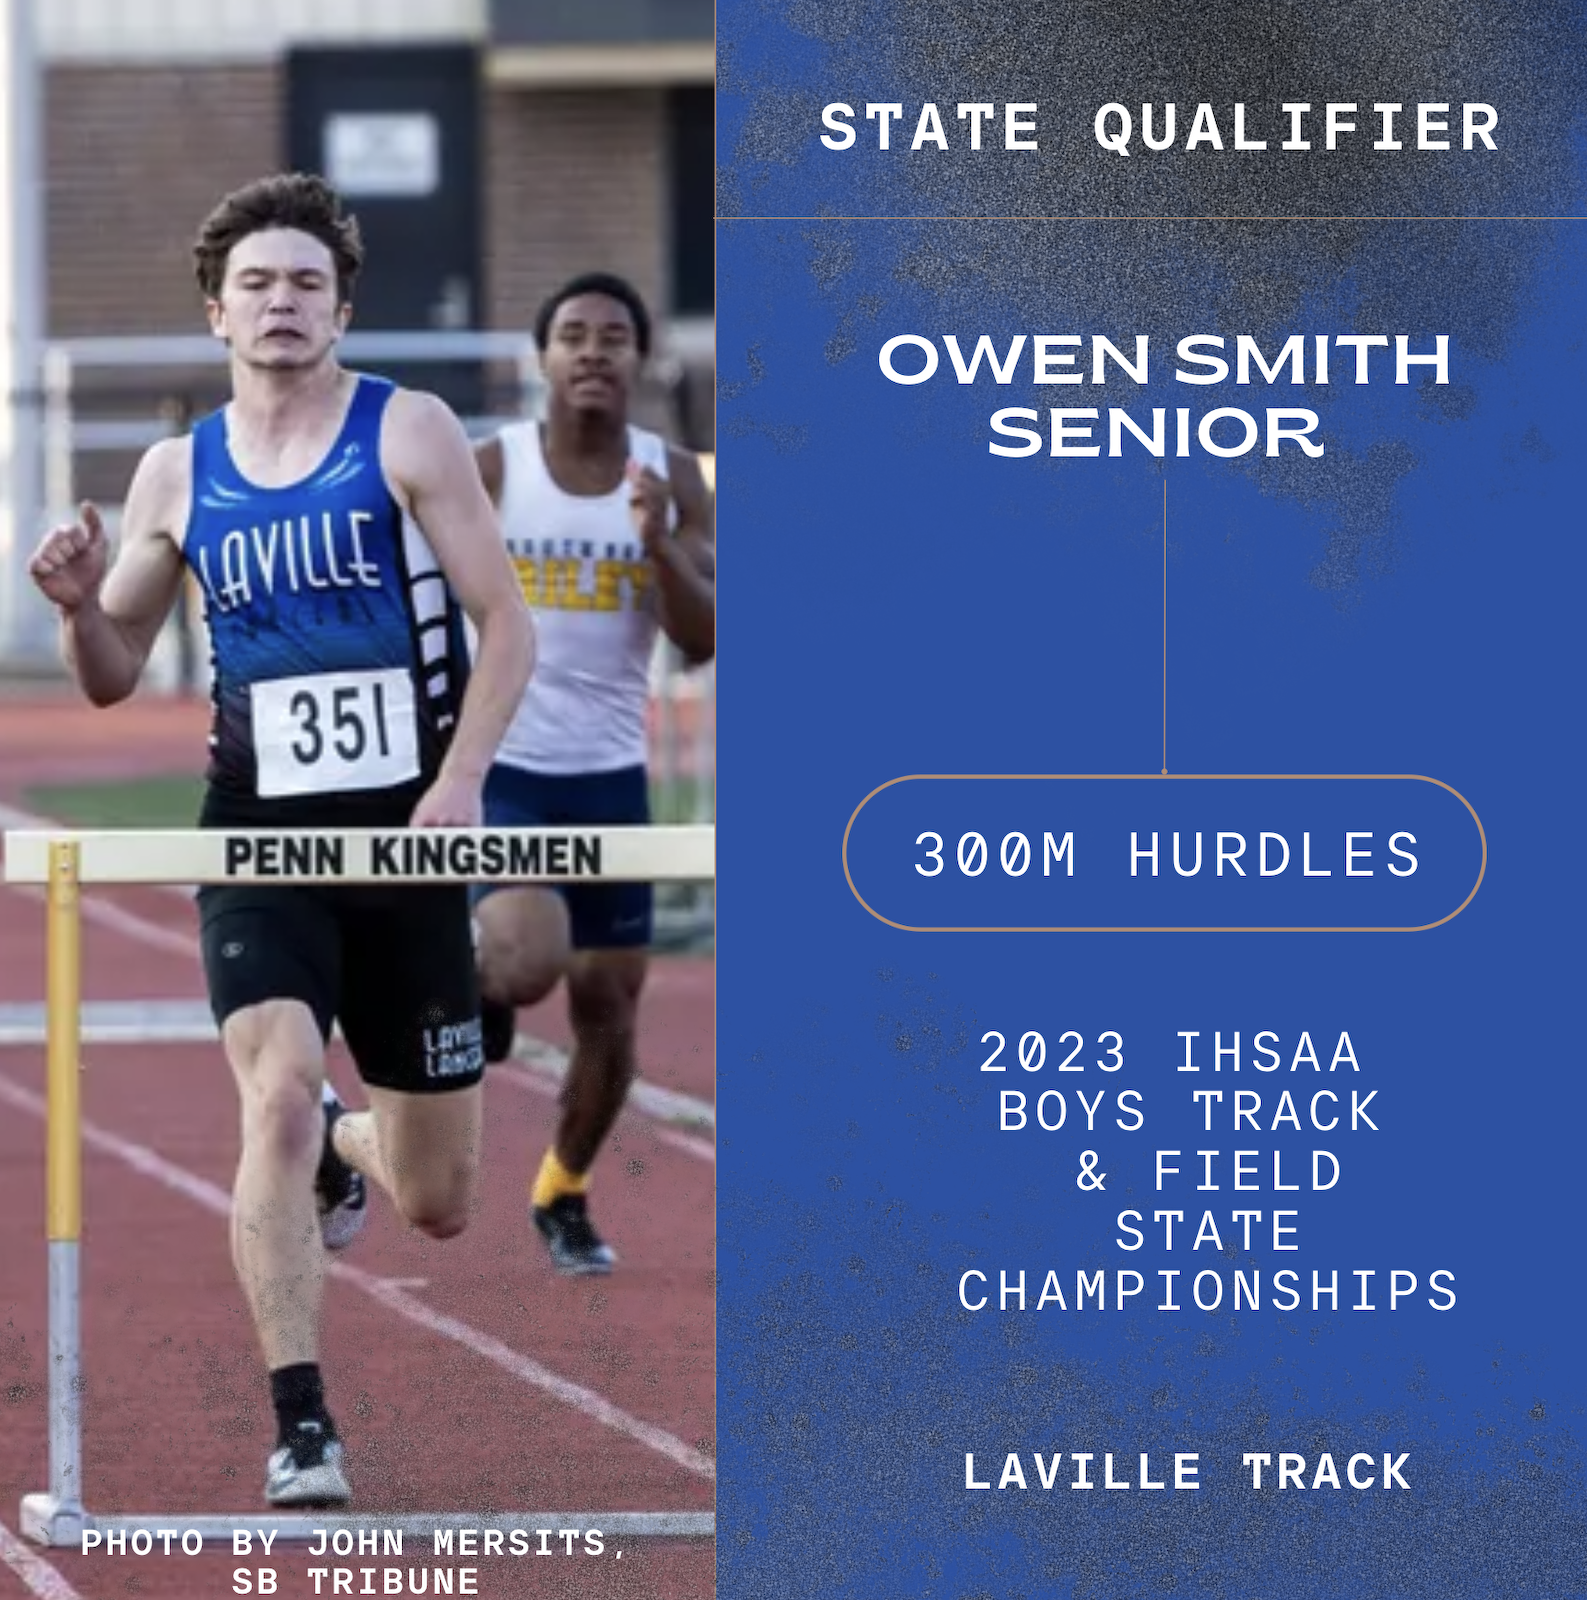 Trk - Smith 300M Hurdles State Graphic.png